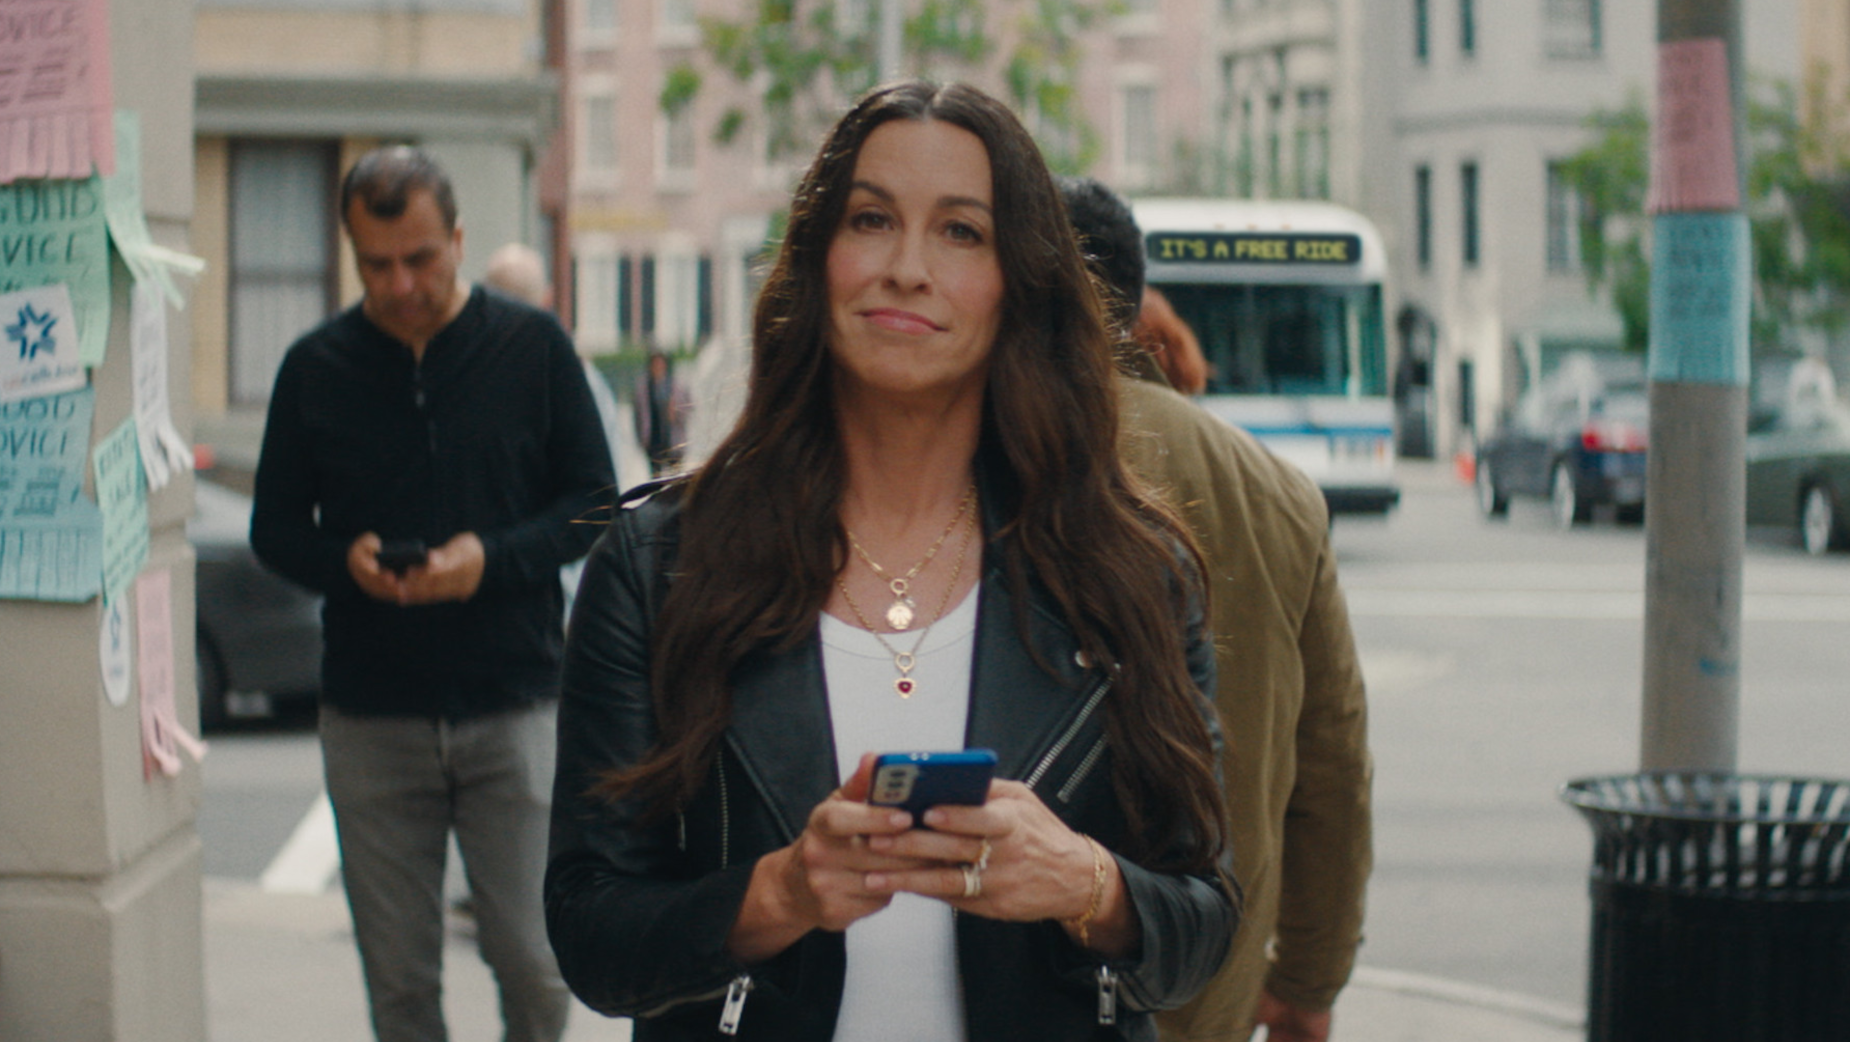 UScellular and Alanis Morissette Highlight Ironies of Modern-Day Phone Usage | LBBOnline